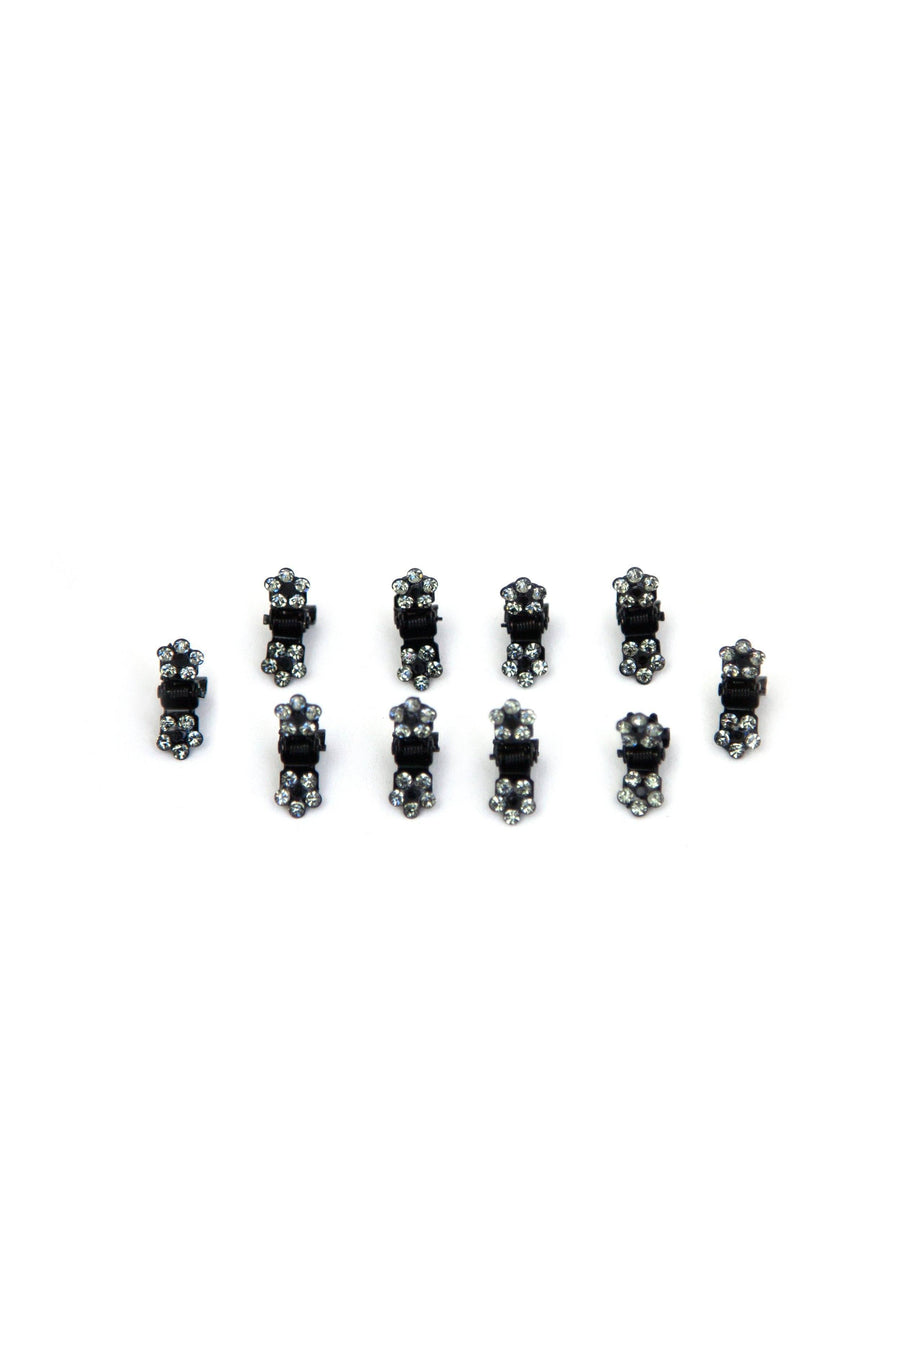 Soho Style Hair Jaws Black / Pack of 10 Mini Flower Hair Jaws with Crystal Petals Black Body